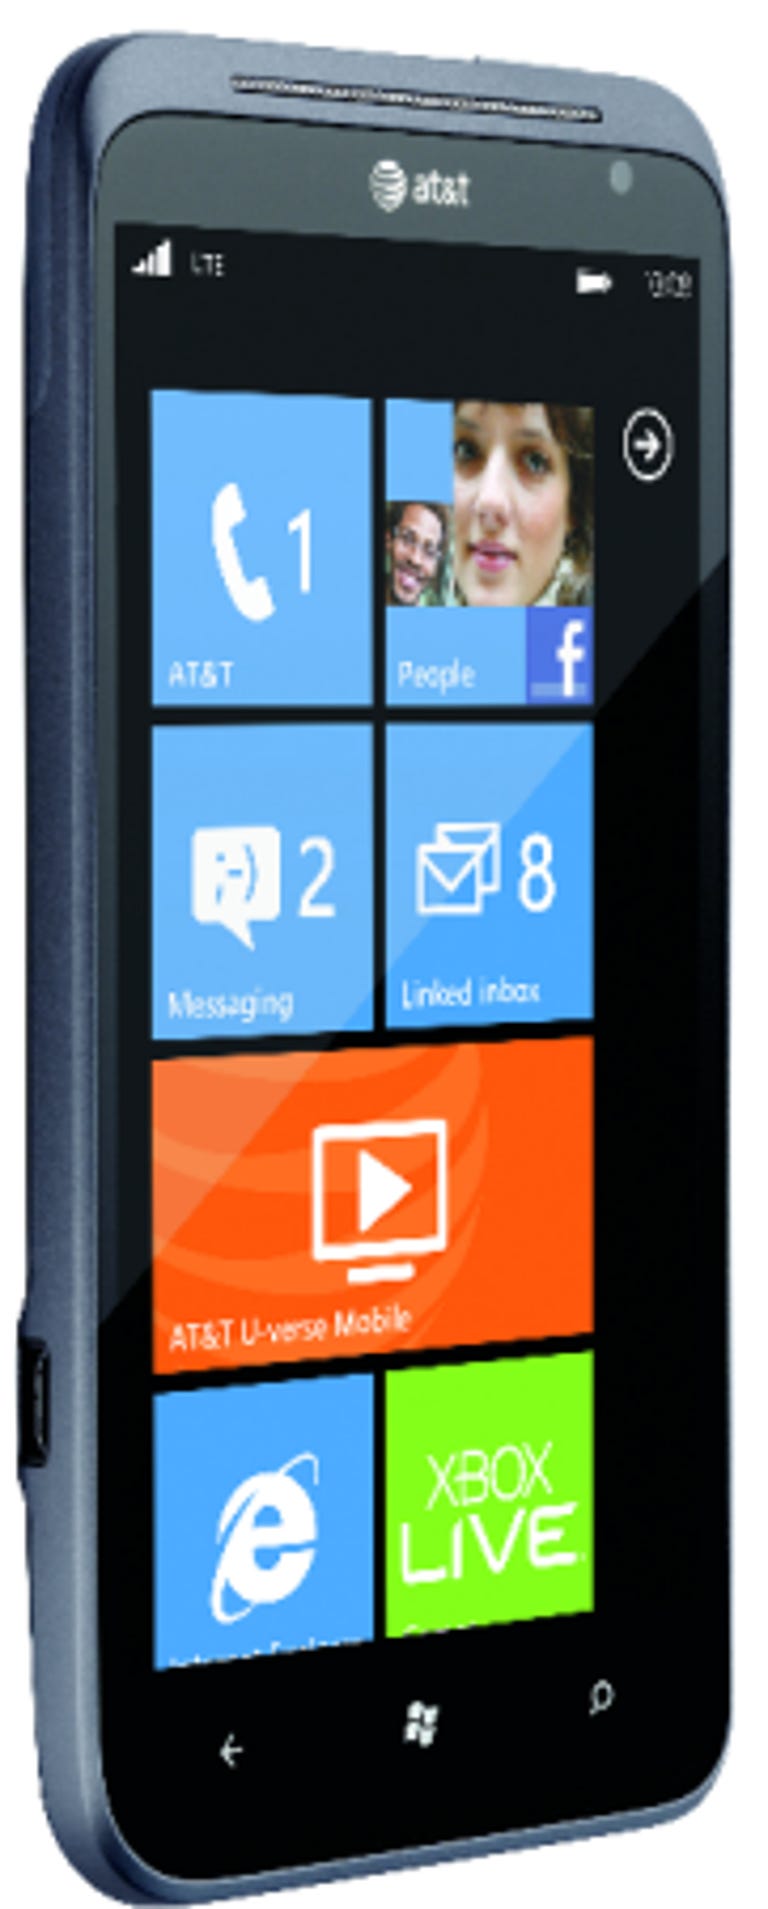 HTC Titan II for AT&T